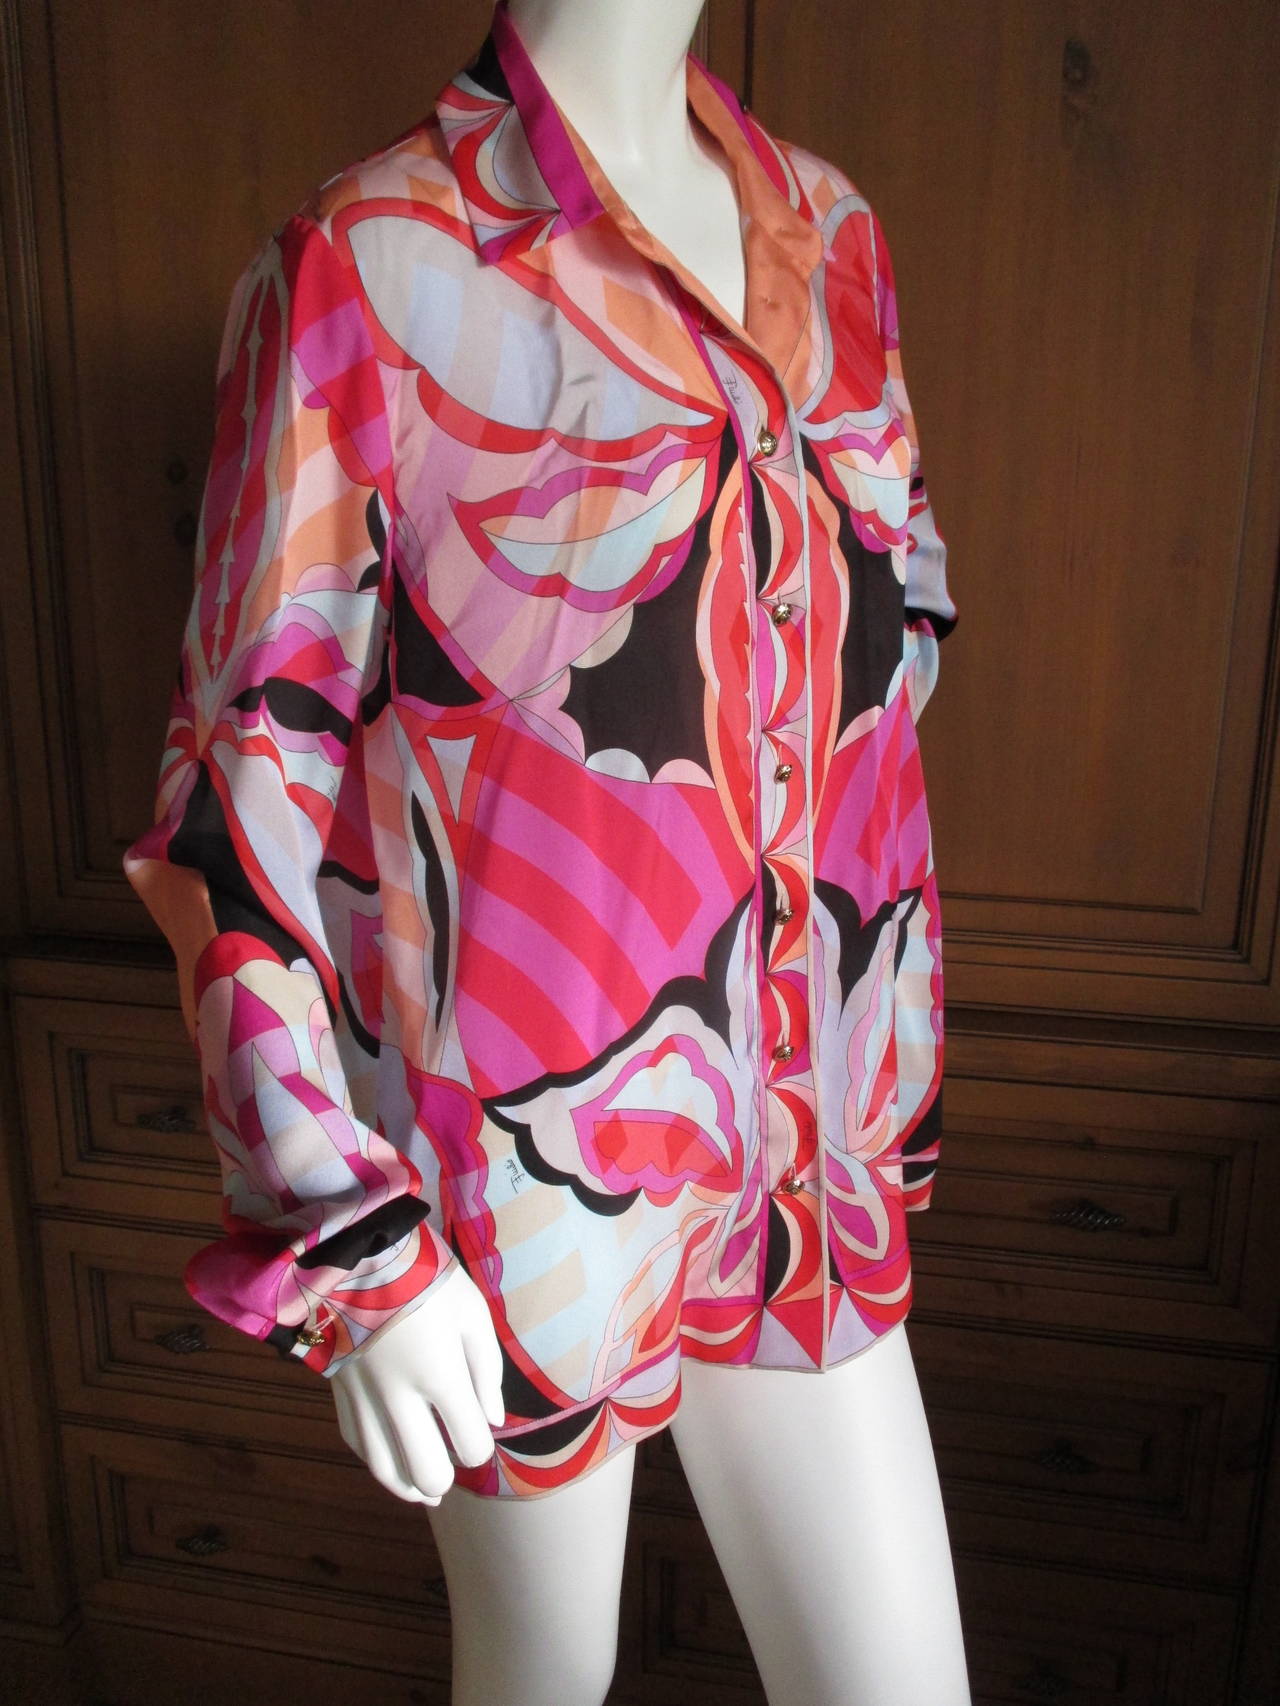 Beautiful silk blouse from Emilio Pucci .
New with tags , Retail $1090
Sz 46